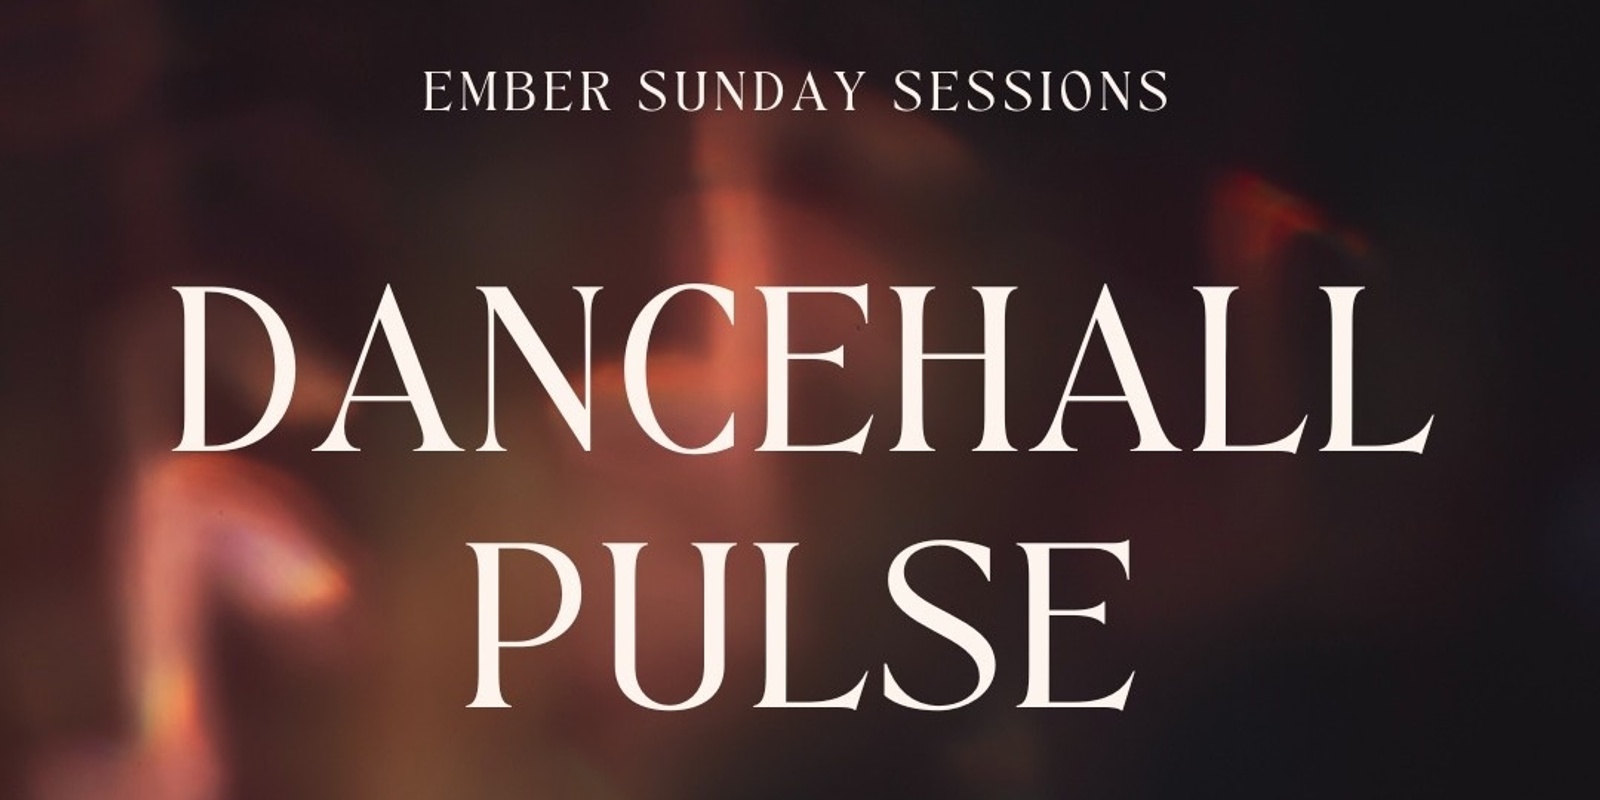 Banner image for Dancehall Pulse: Intensive Workshop Day presented by Ember